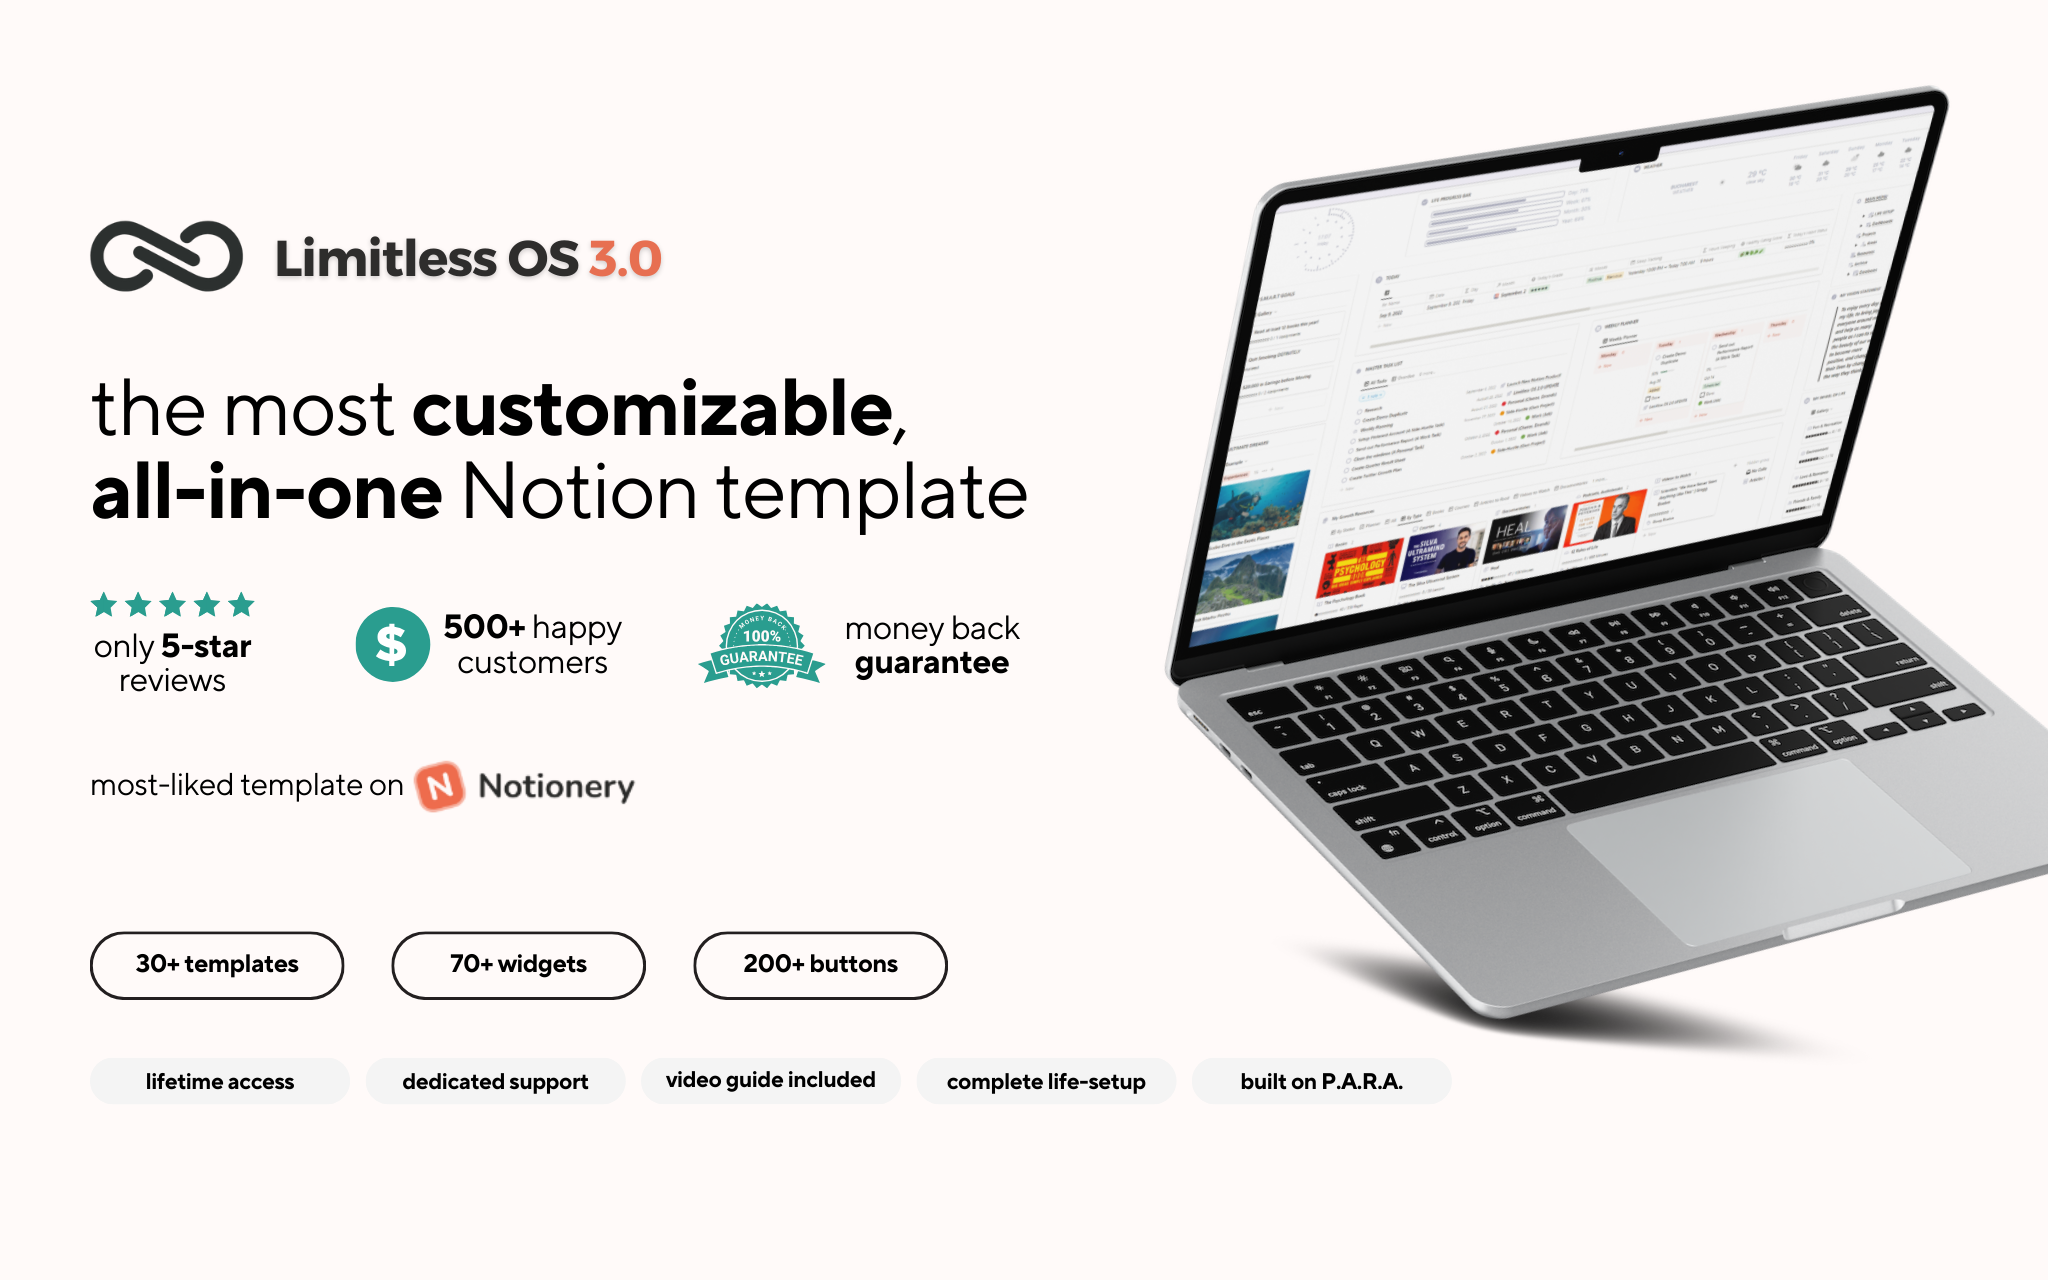 Limitless OS is the Ultimate, All-In-One Notion Template. 
It's the last Notion template you'll ever need to buy!